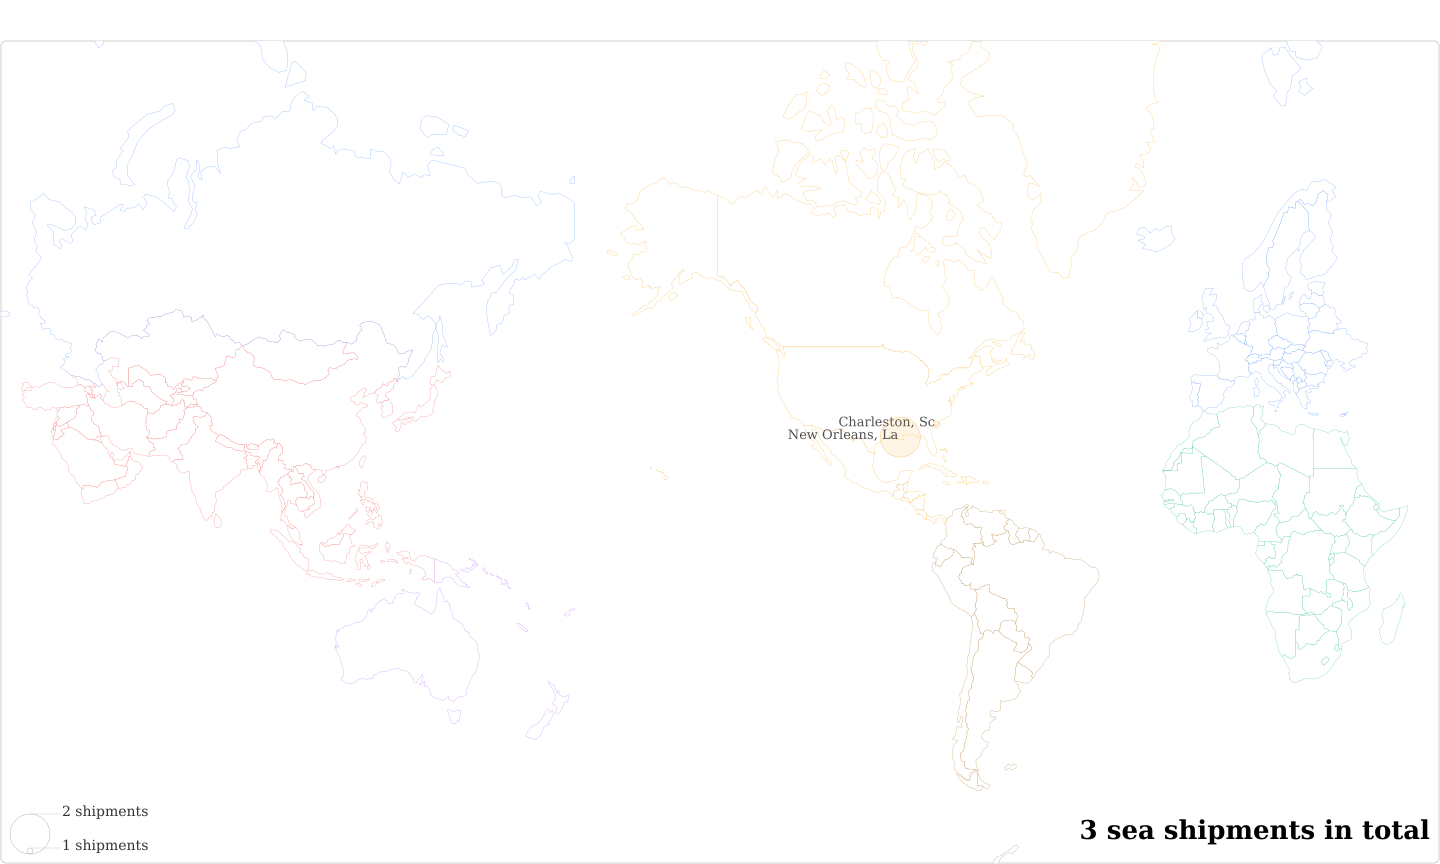 Envases Tp S A's Imports Per Country Map